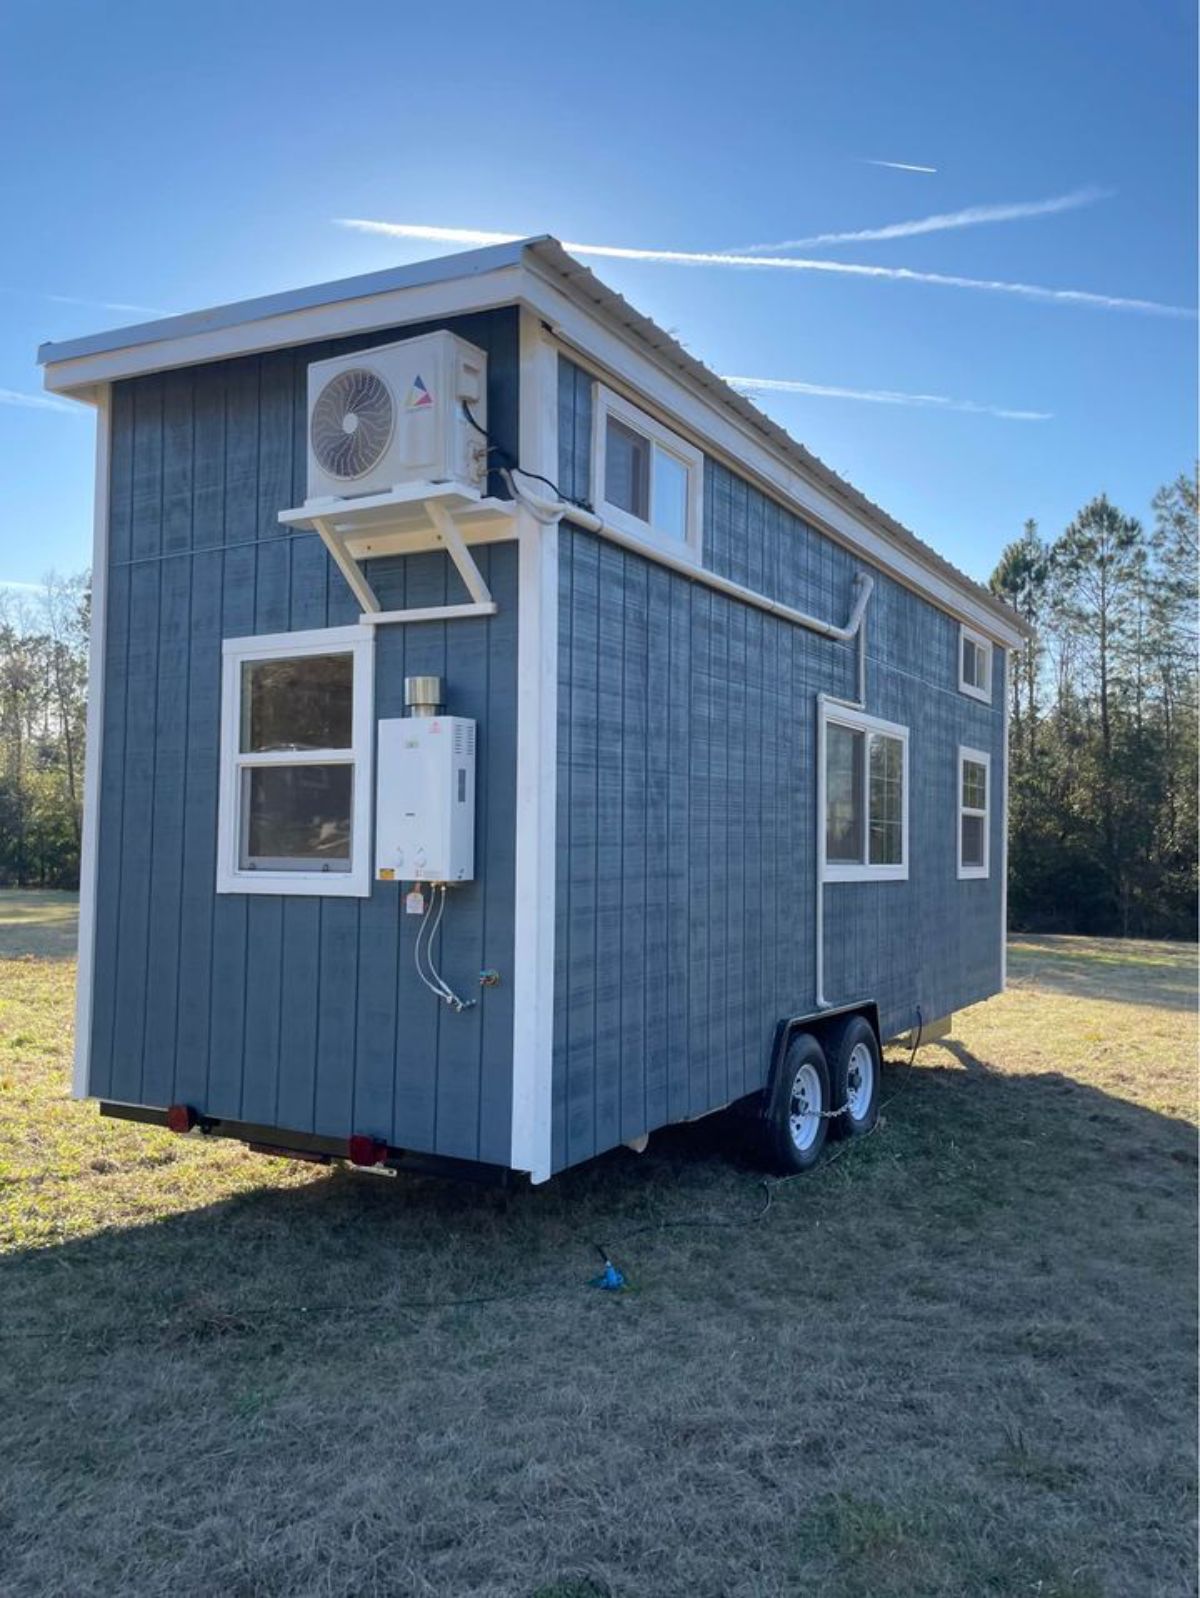 24' house on wheels parked on the grounds